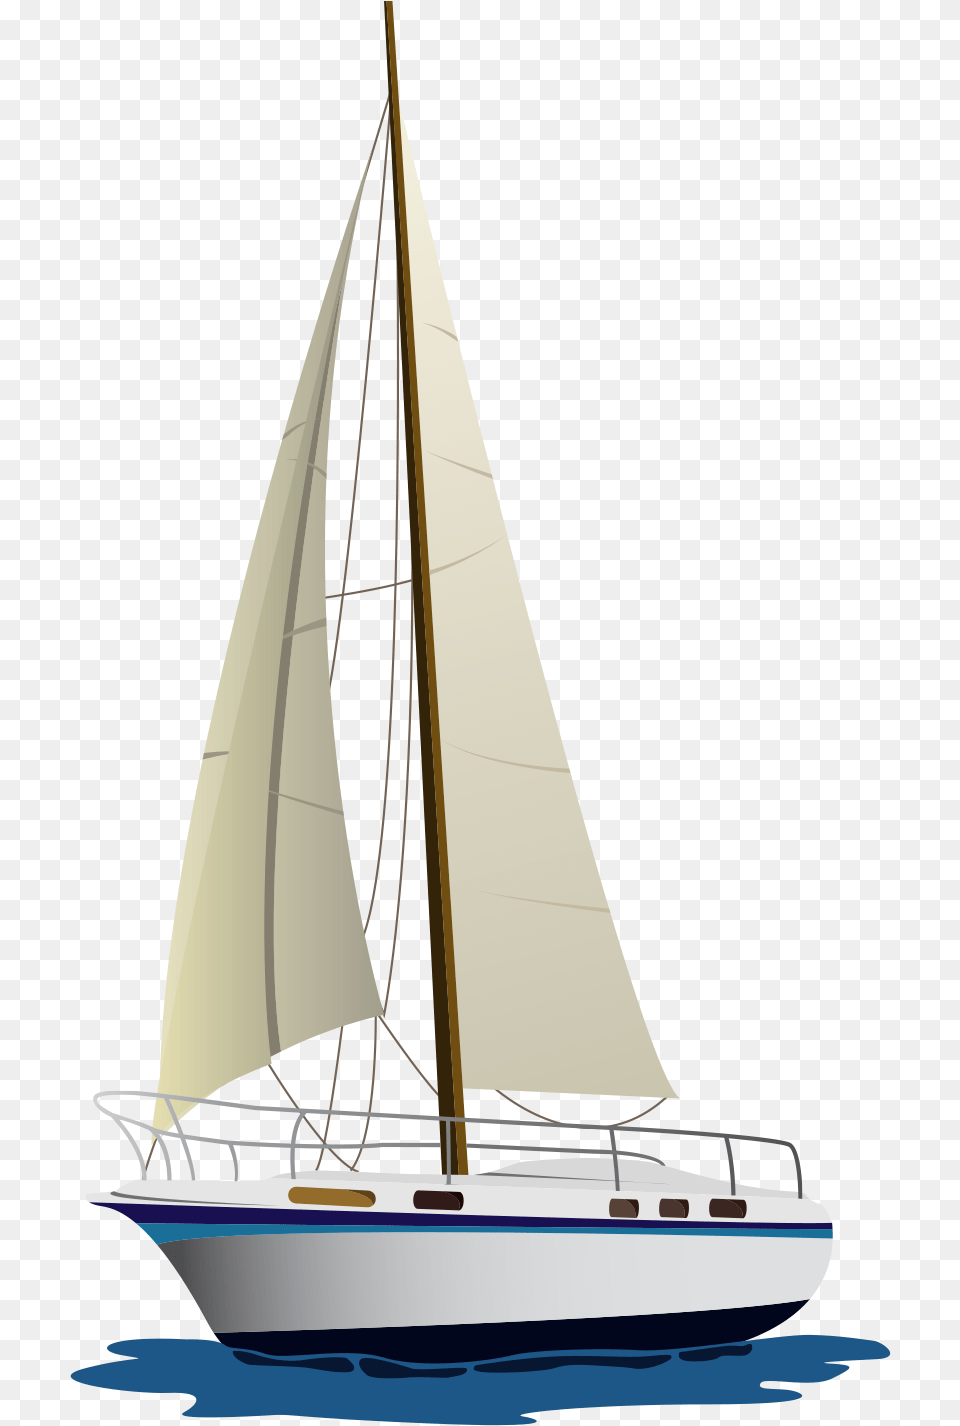 Hd Transparent Images Pluspng Image Sailboat, Boat, Transportation, Vehicle, Yacht Free Png Download